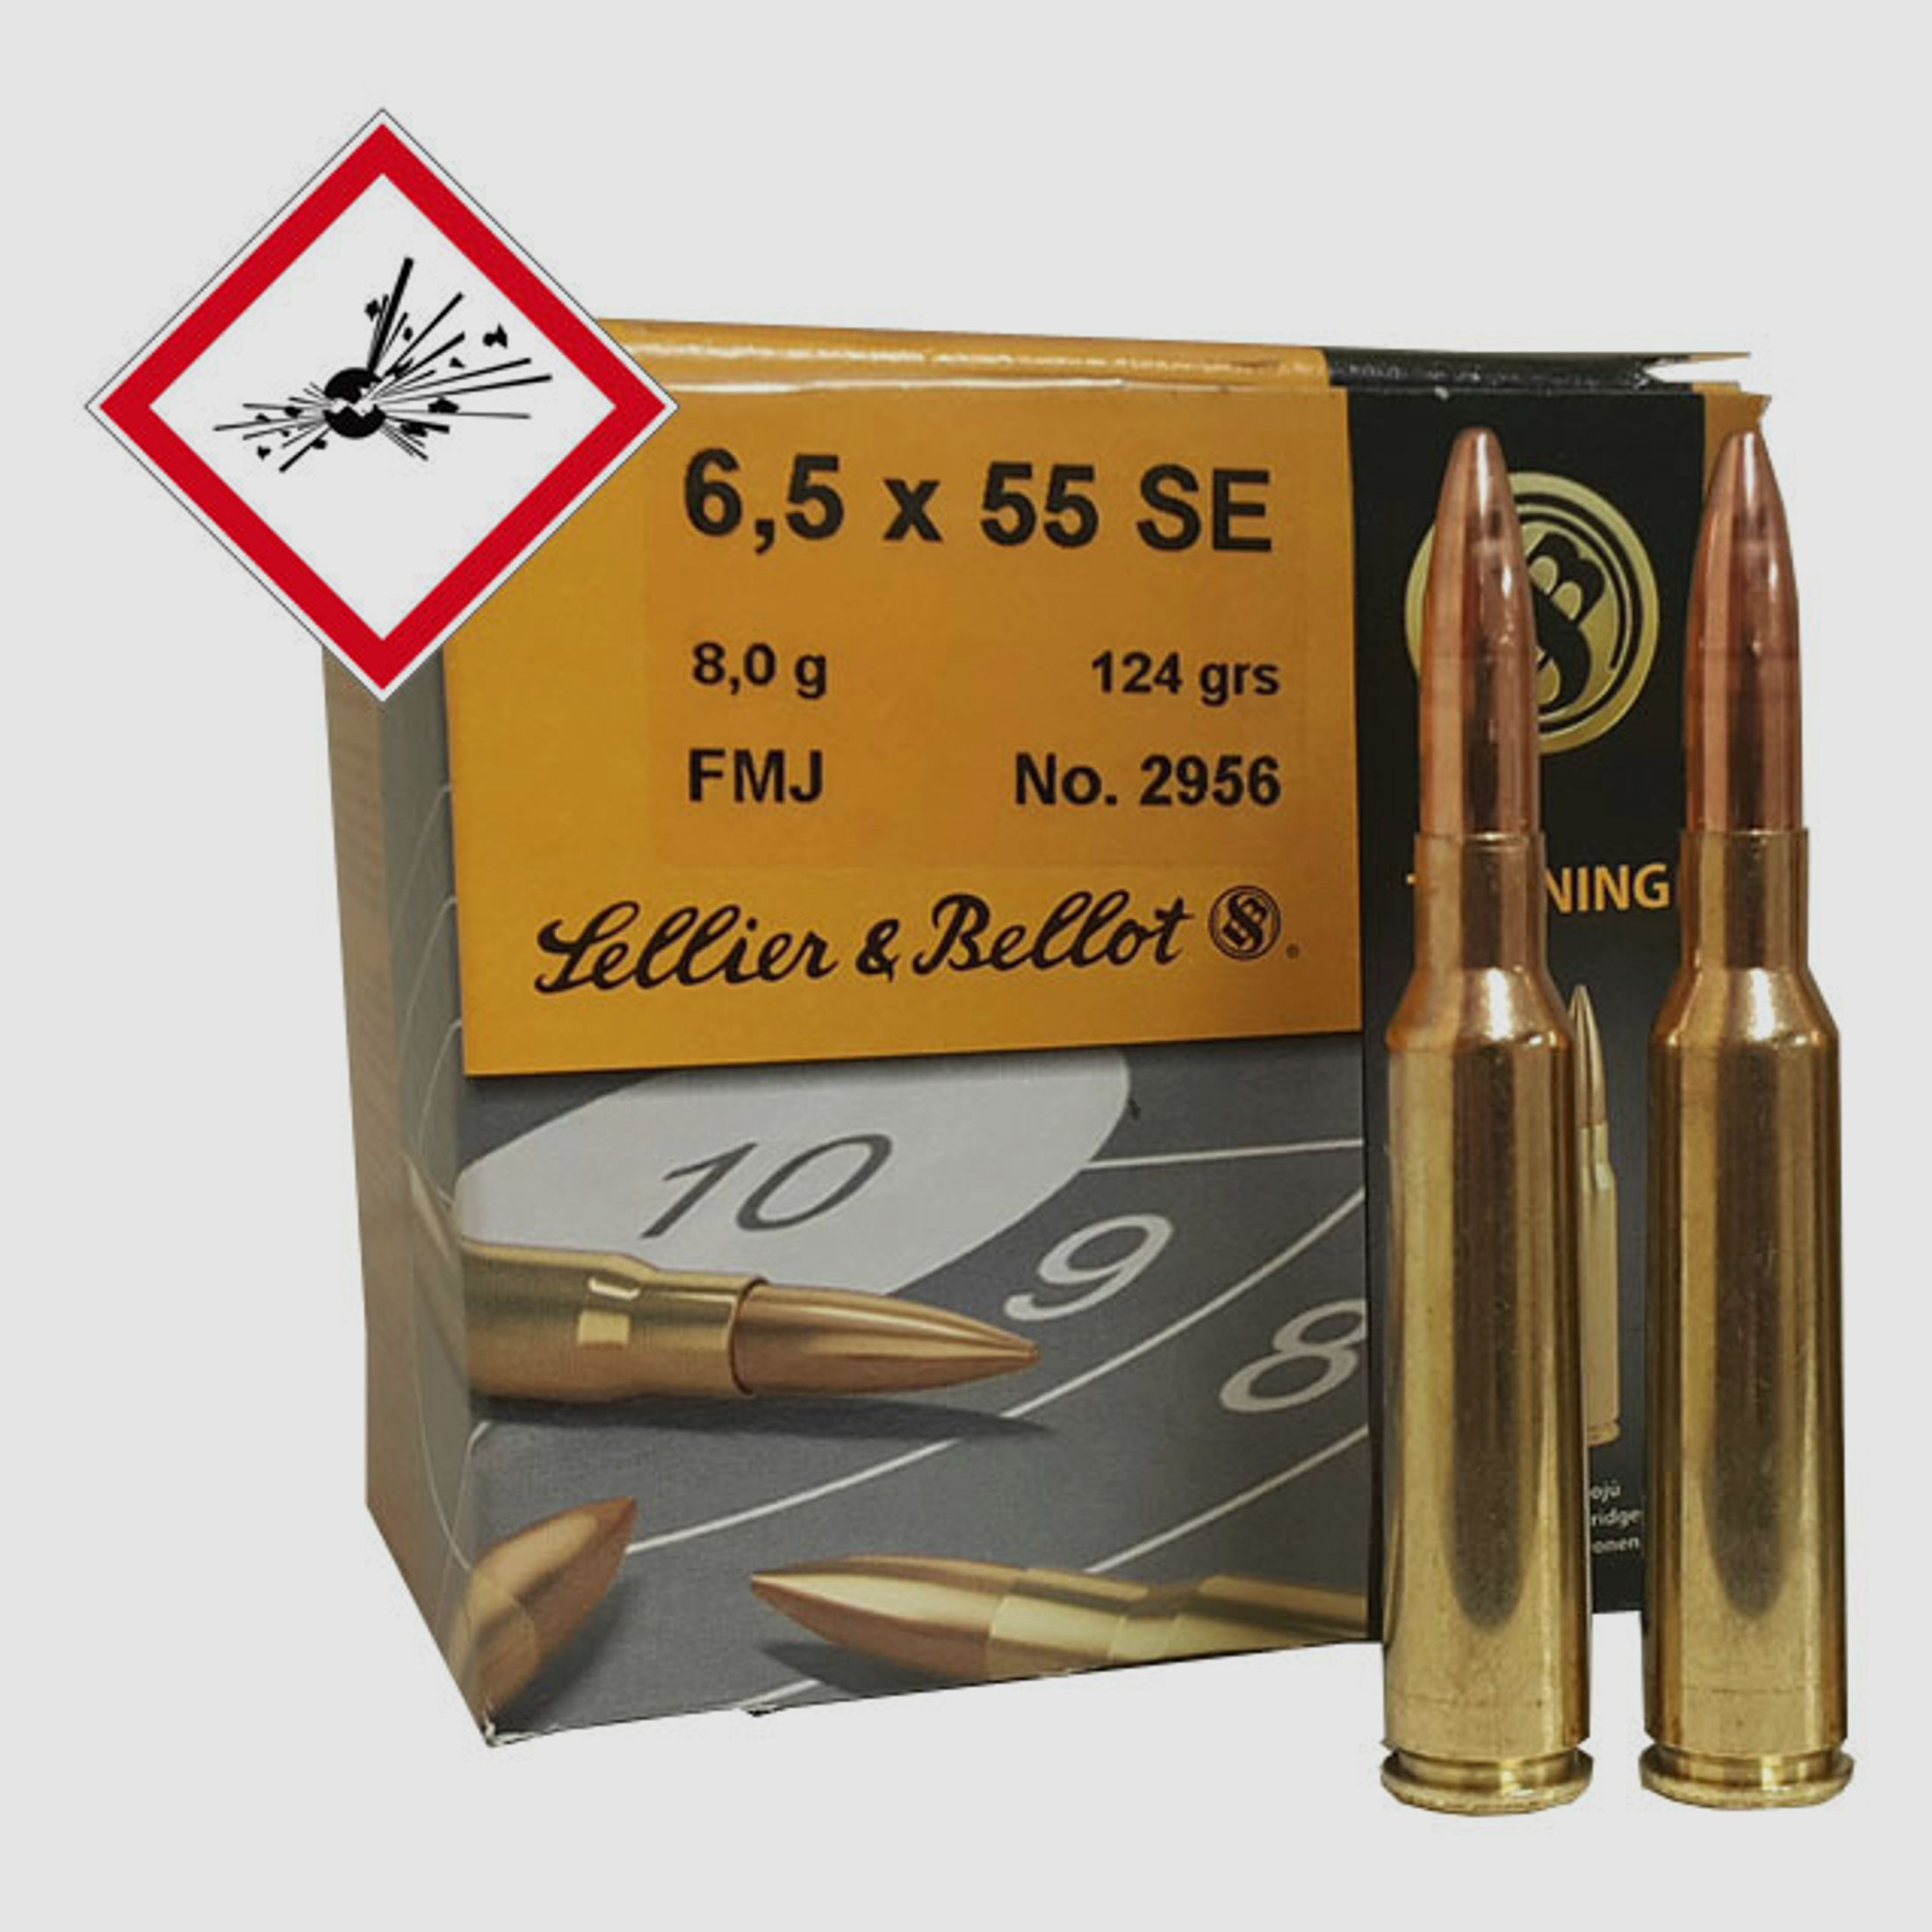 Sellier & Bellot 6,5X55 FMJ 124 grs